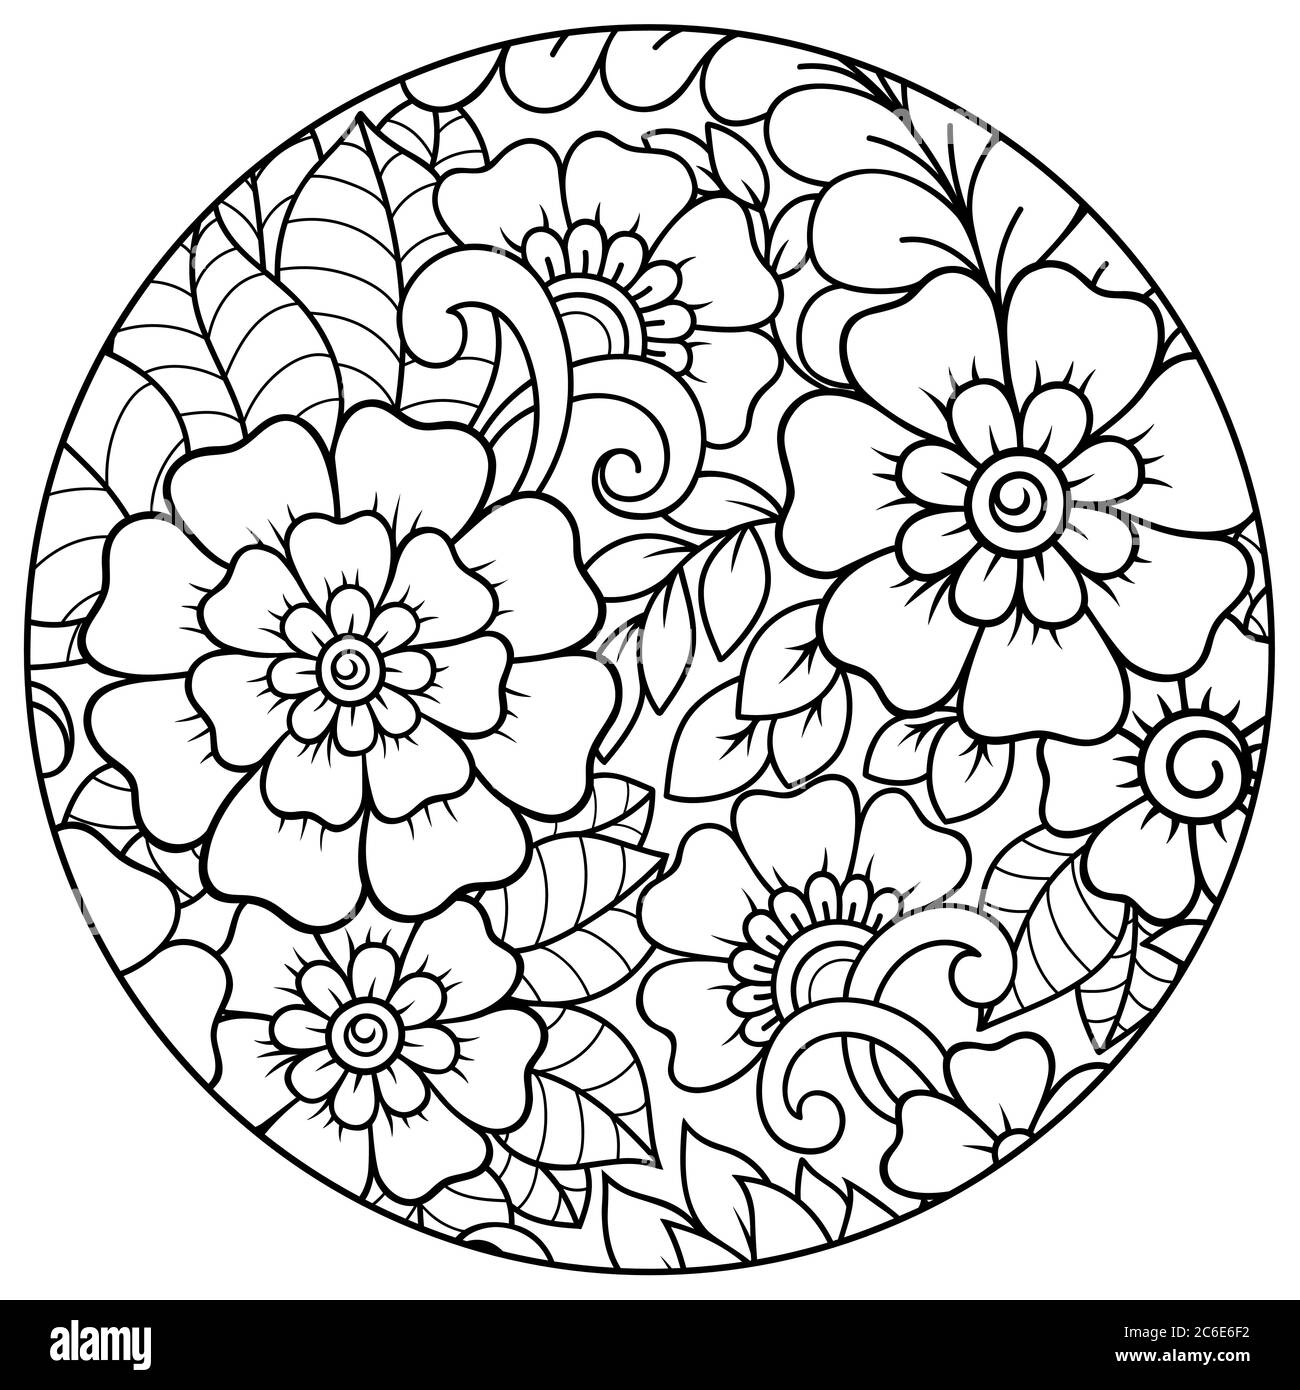 Outline round floral pattern for coloring the book page